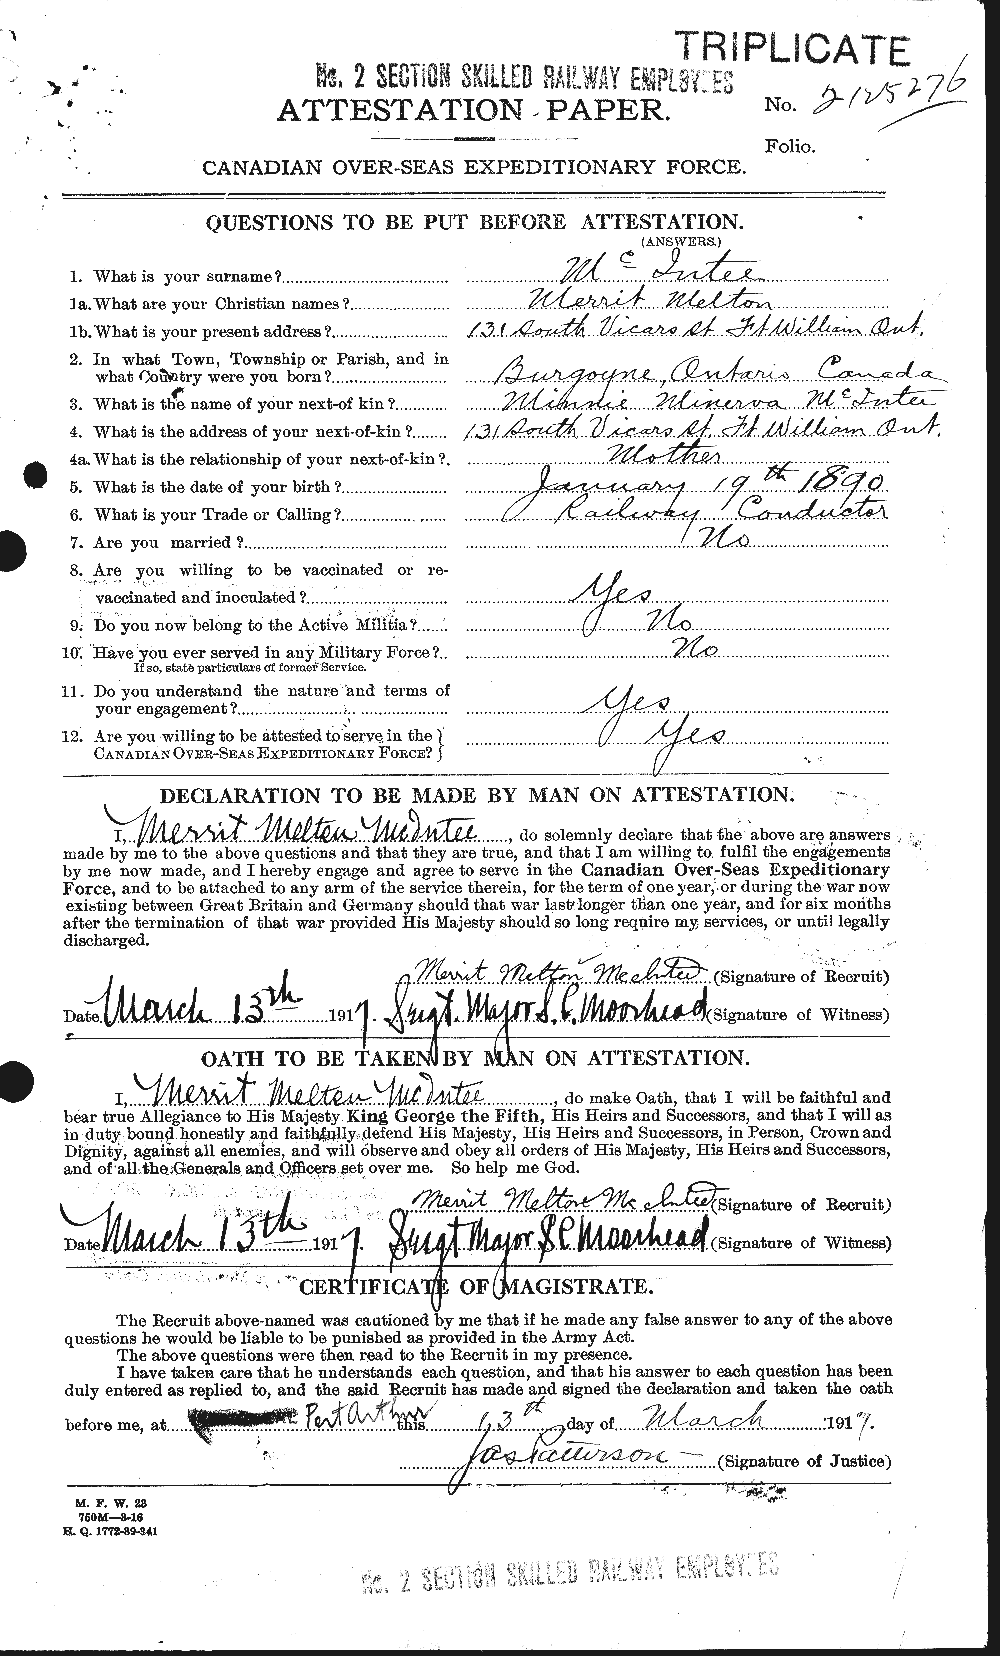 Personnel Records of the First World War - CEF 530566a